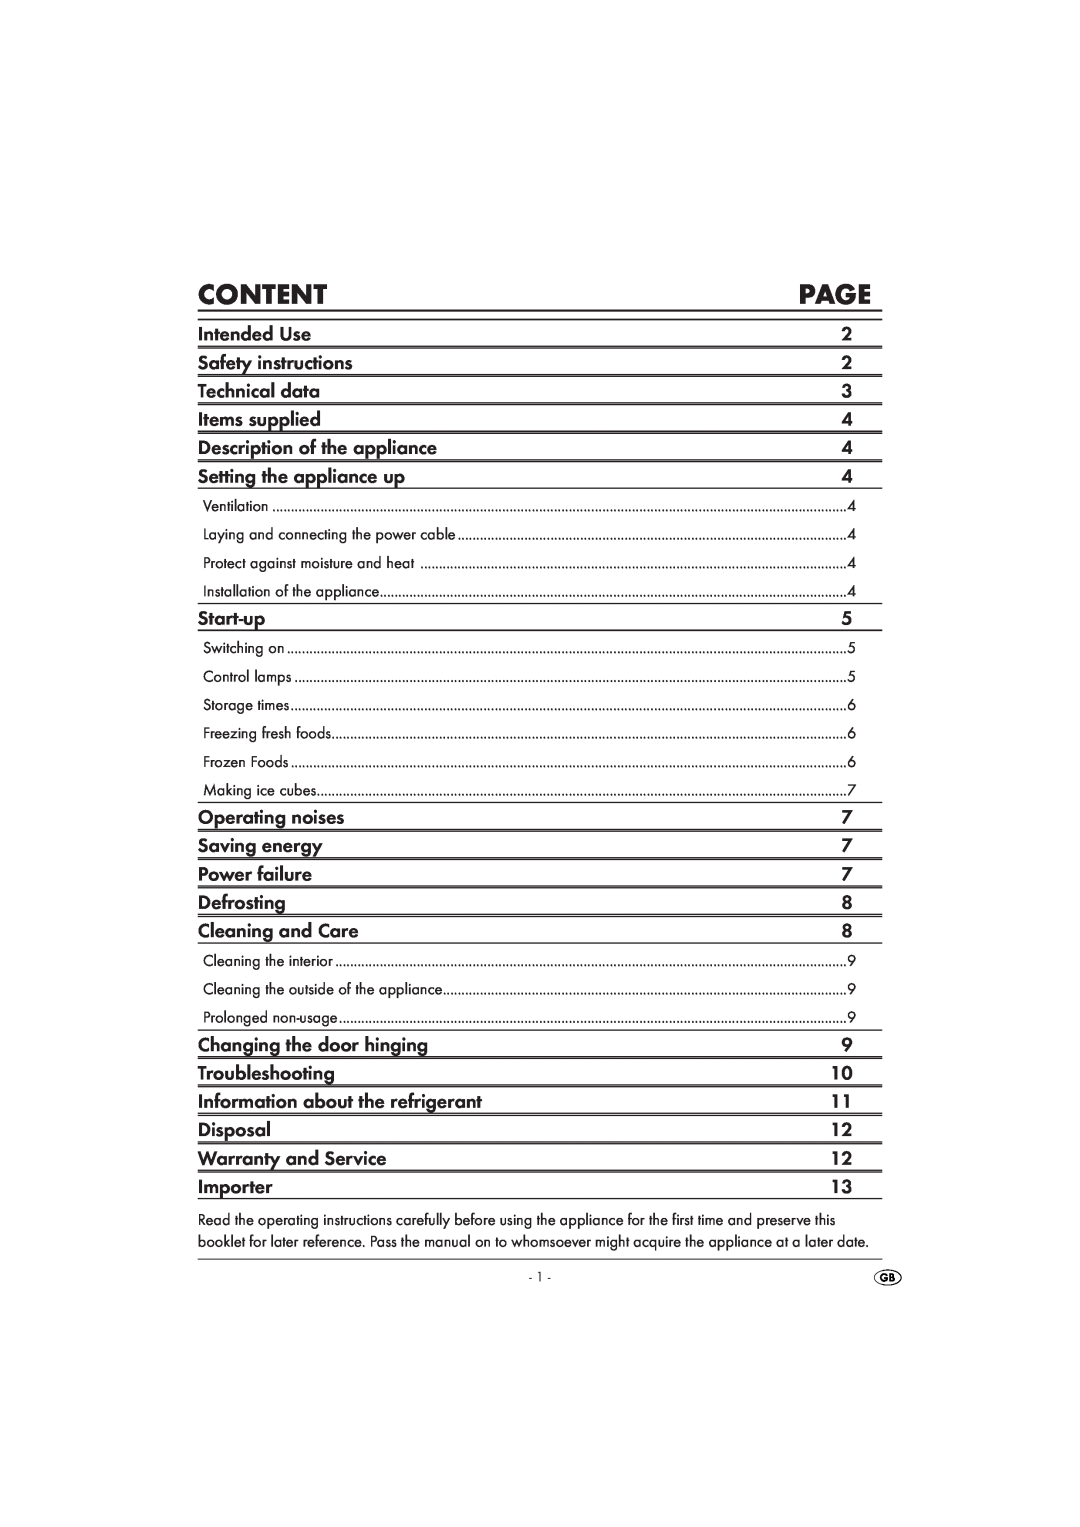 Silvercrest STG 85 manual Content, Page 